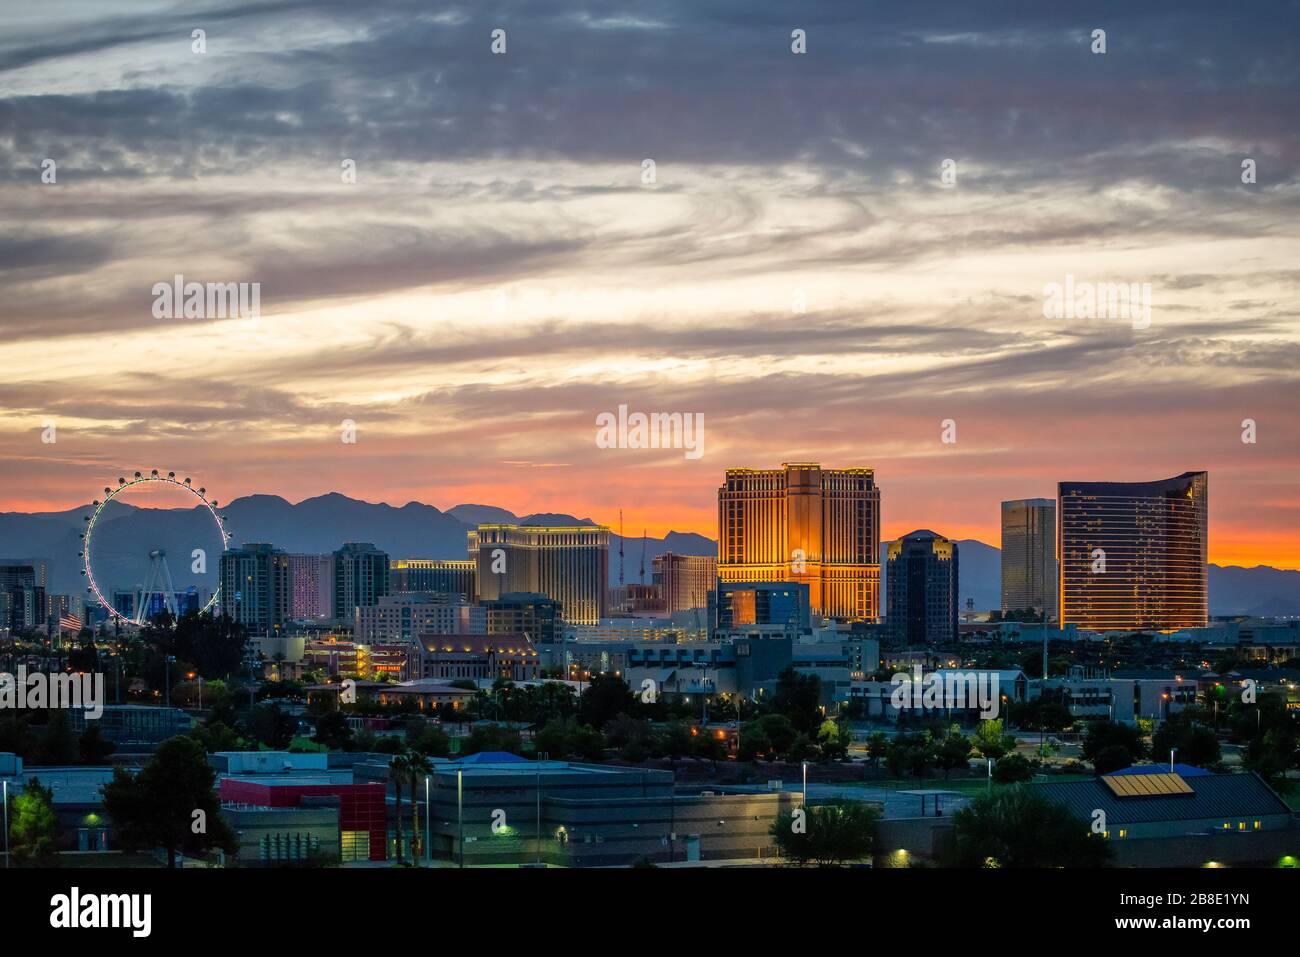 USA, Nevada, Clark County, Las Vegas. A scenic view of the famous Vegas skyline of casinos, hotels, and ferris wheel on the strip. Stock Photo